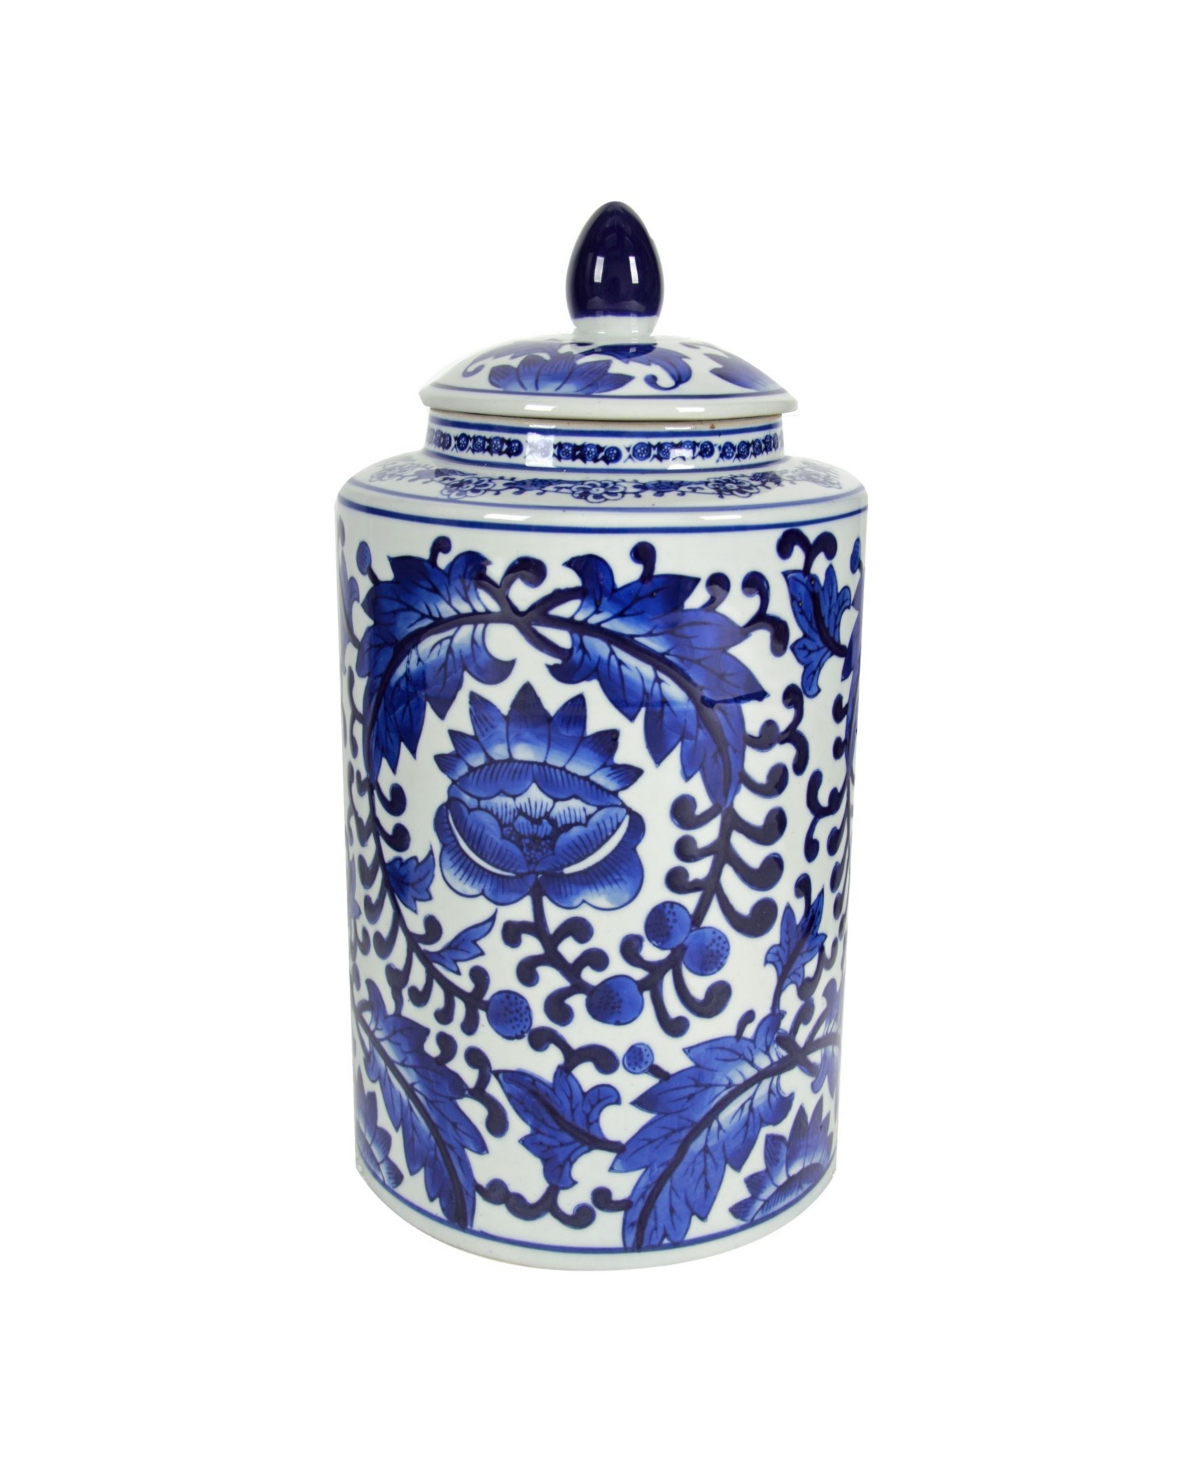 Ab Home Aline Lidded Round Jar, Tall In Blue